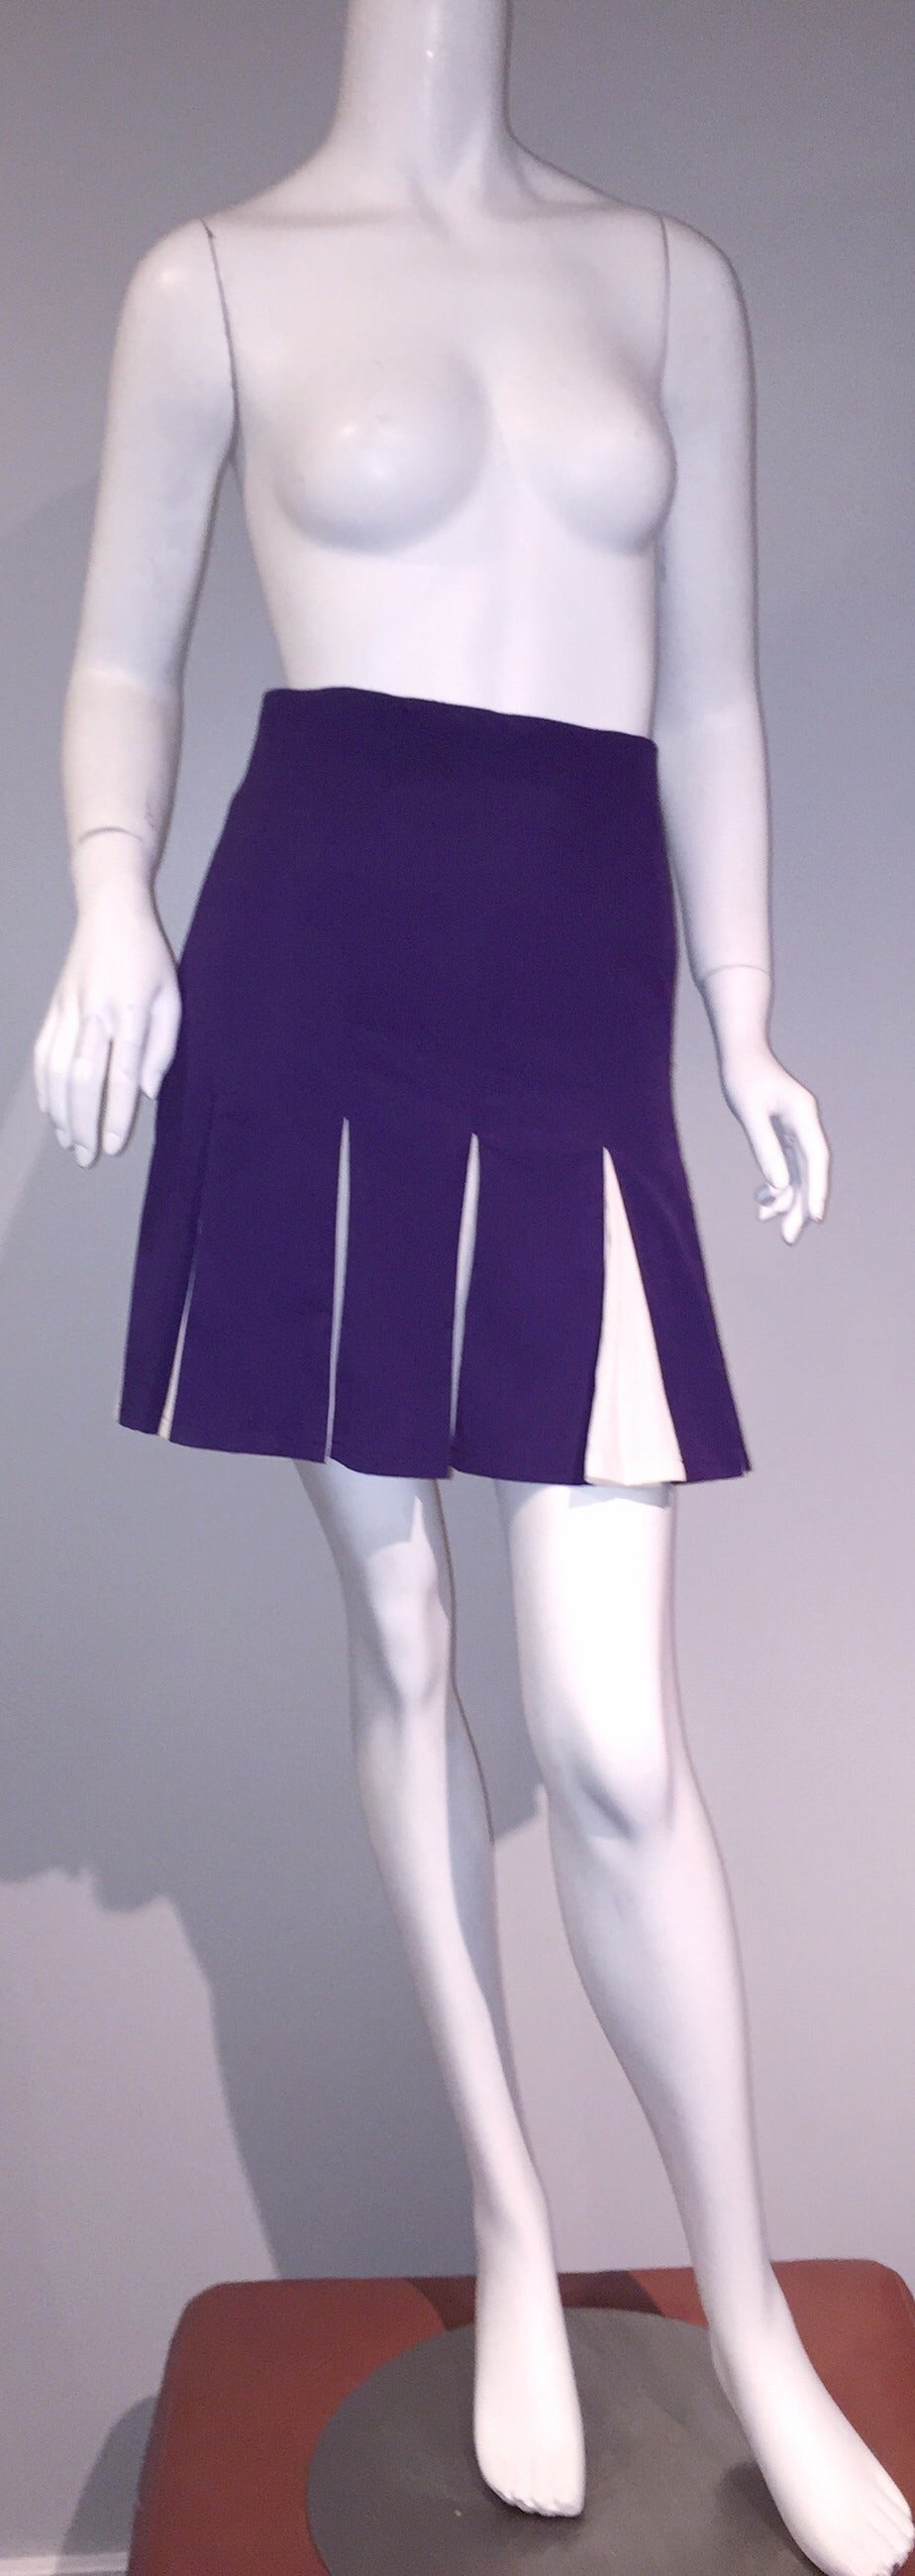 Wonderful 1990s Plein Sud high-waisted pleated skirt! Vibrant purple color, with white knife pleating. Looks amazing on--Very flattering fit! Perfect for day or night. Great with a tank and sandals for day wear...great with a blouse or sweater, with